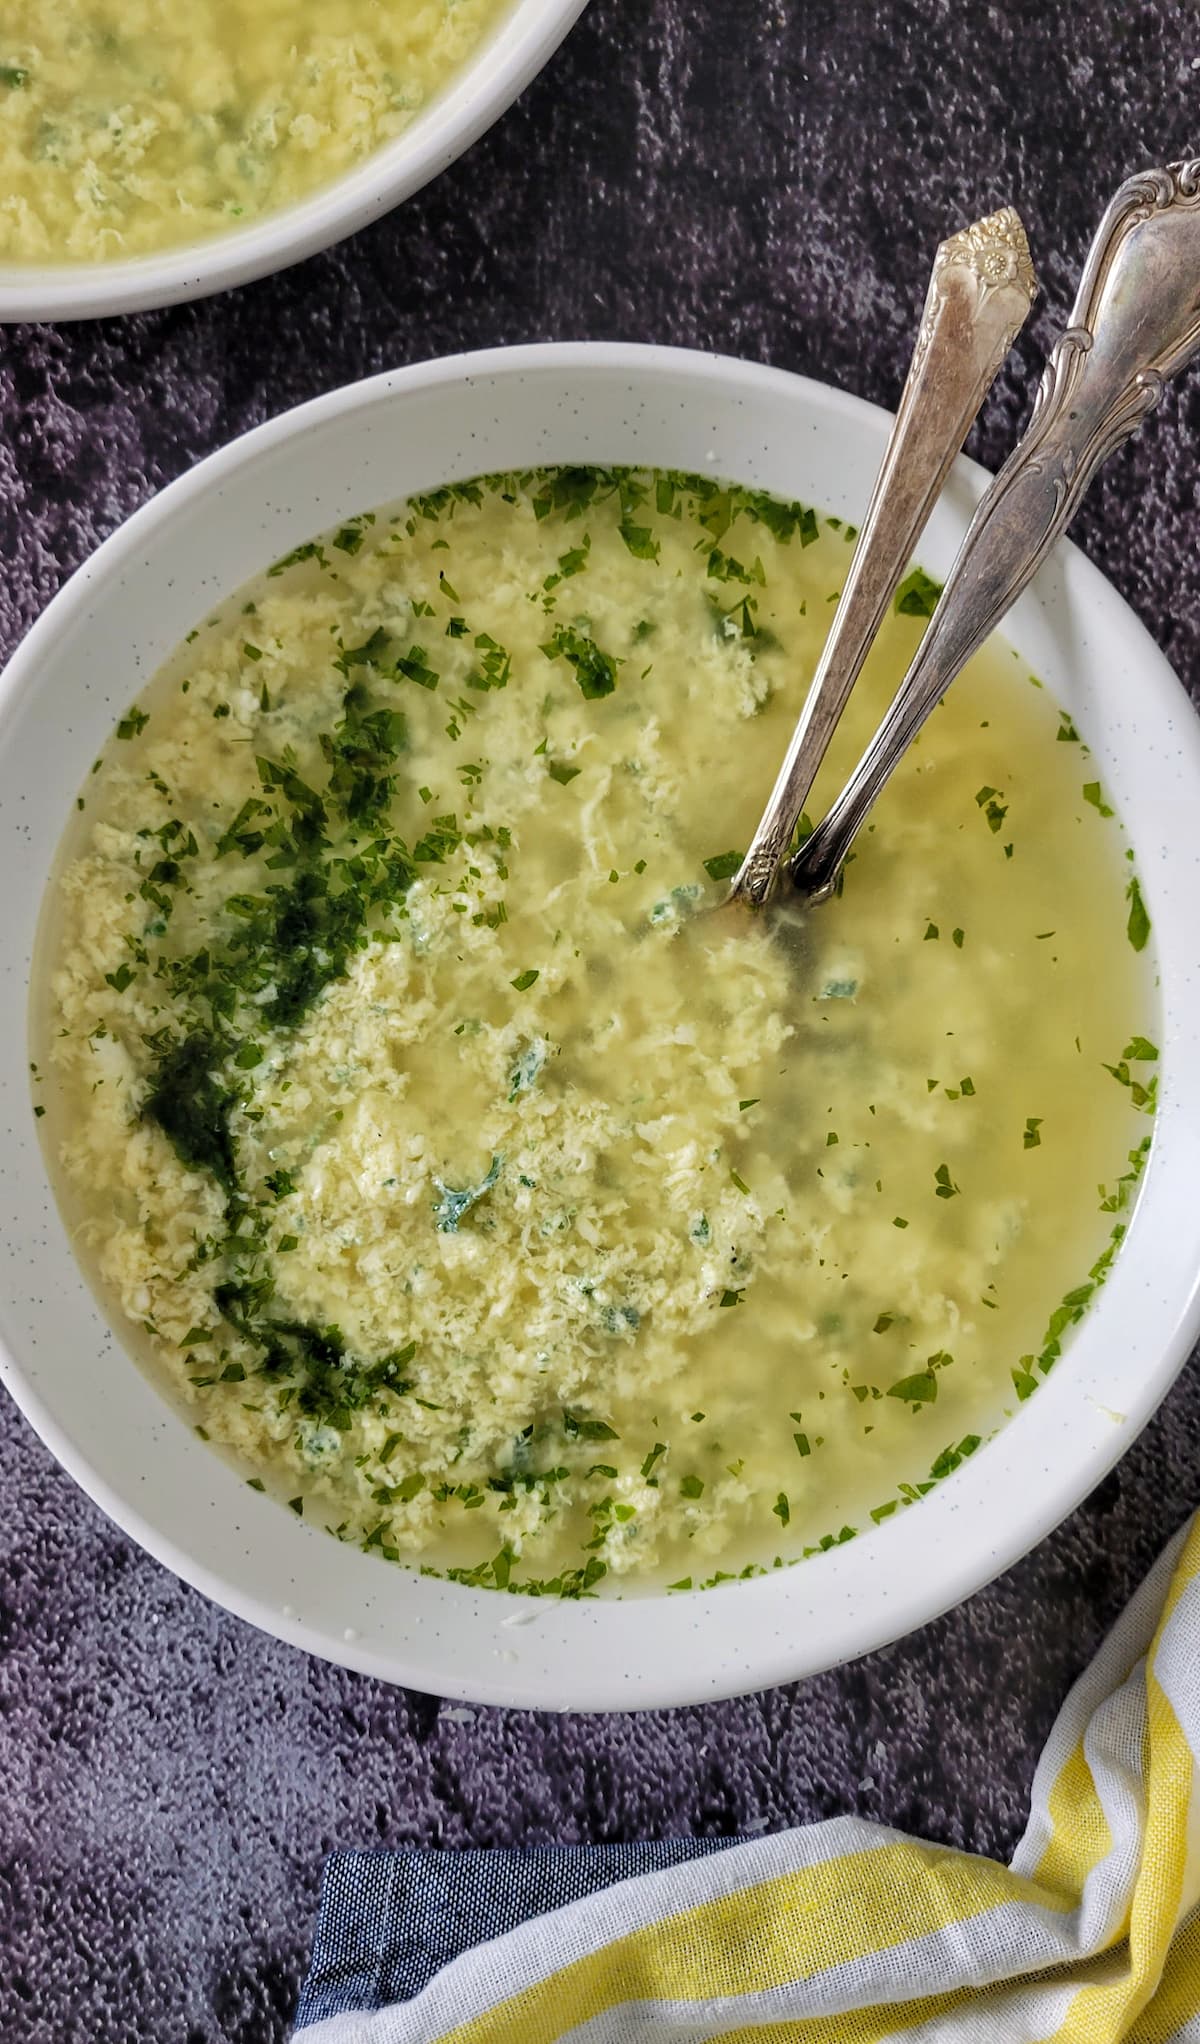 bowl of egg drop soup with chopped fresh parsley, two spoons in the bowl, another bowl of soup in the background